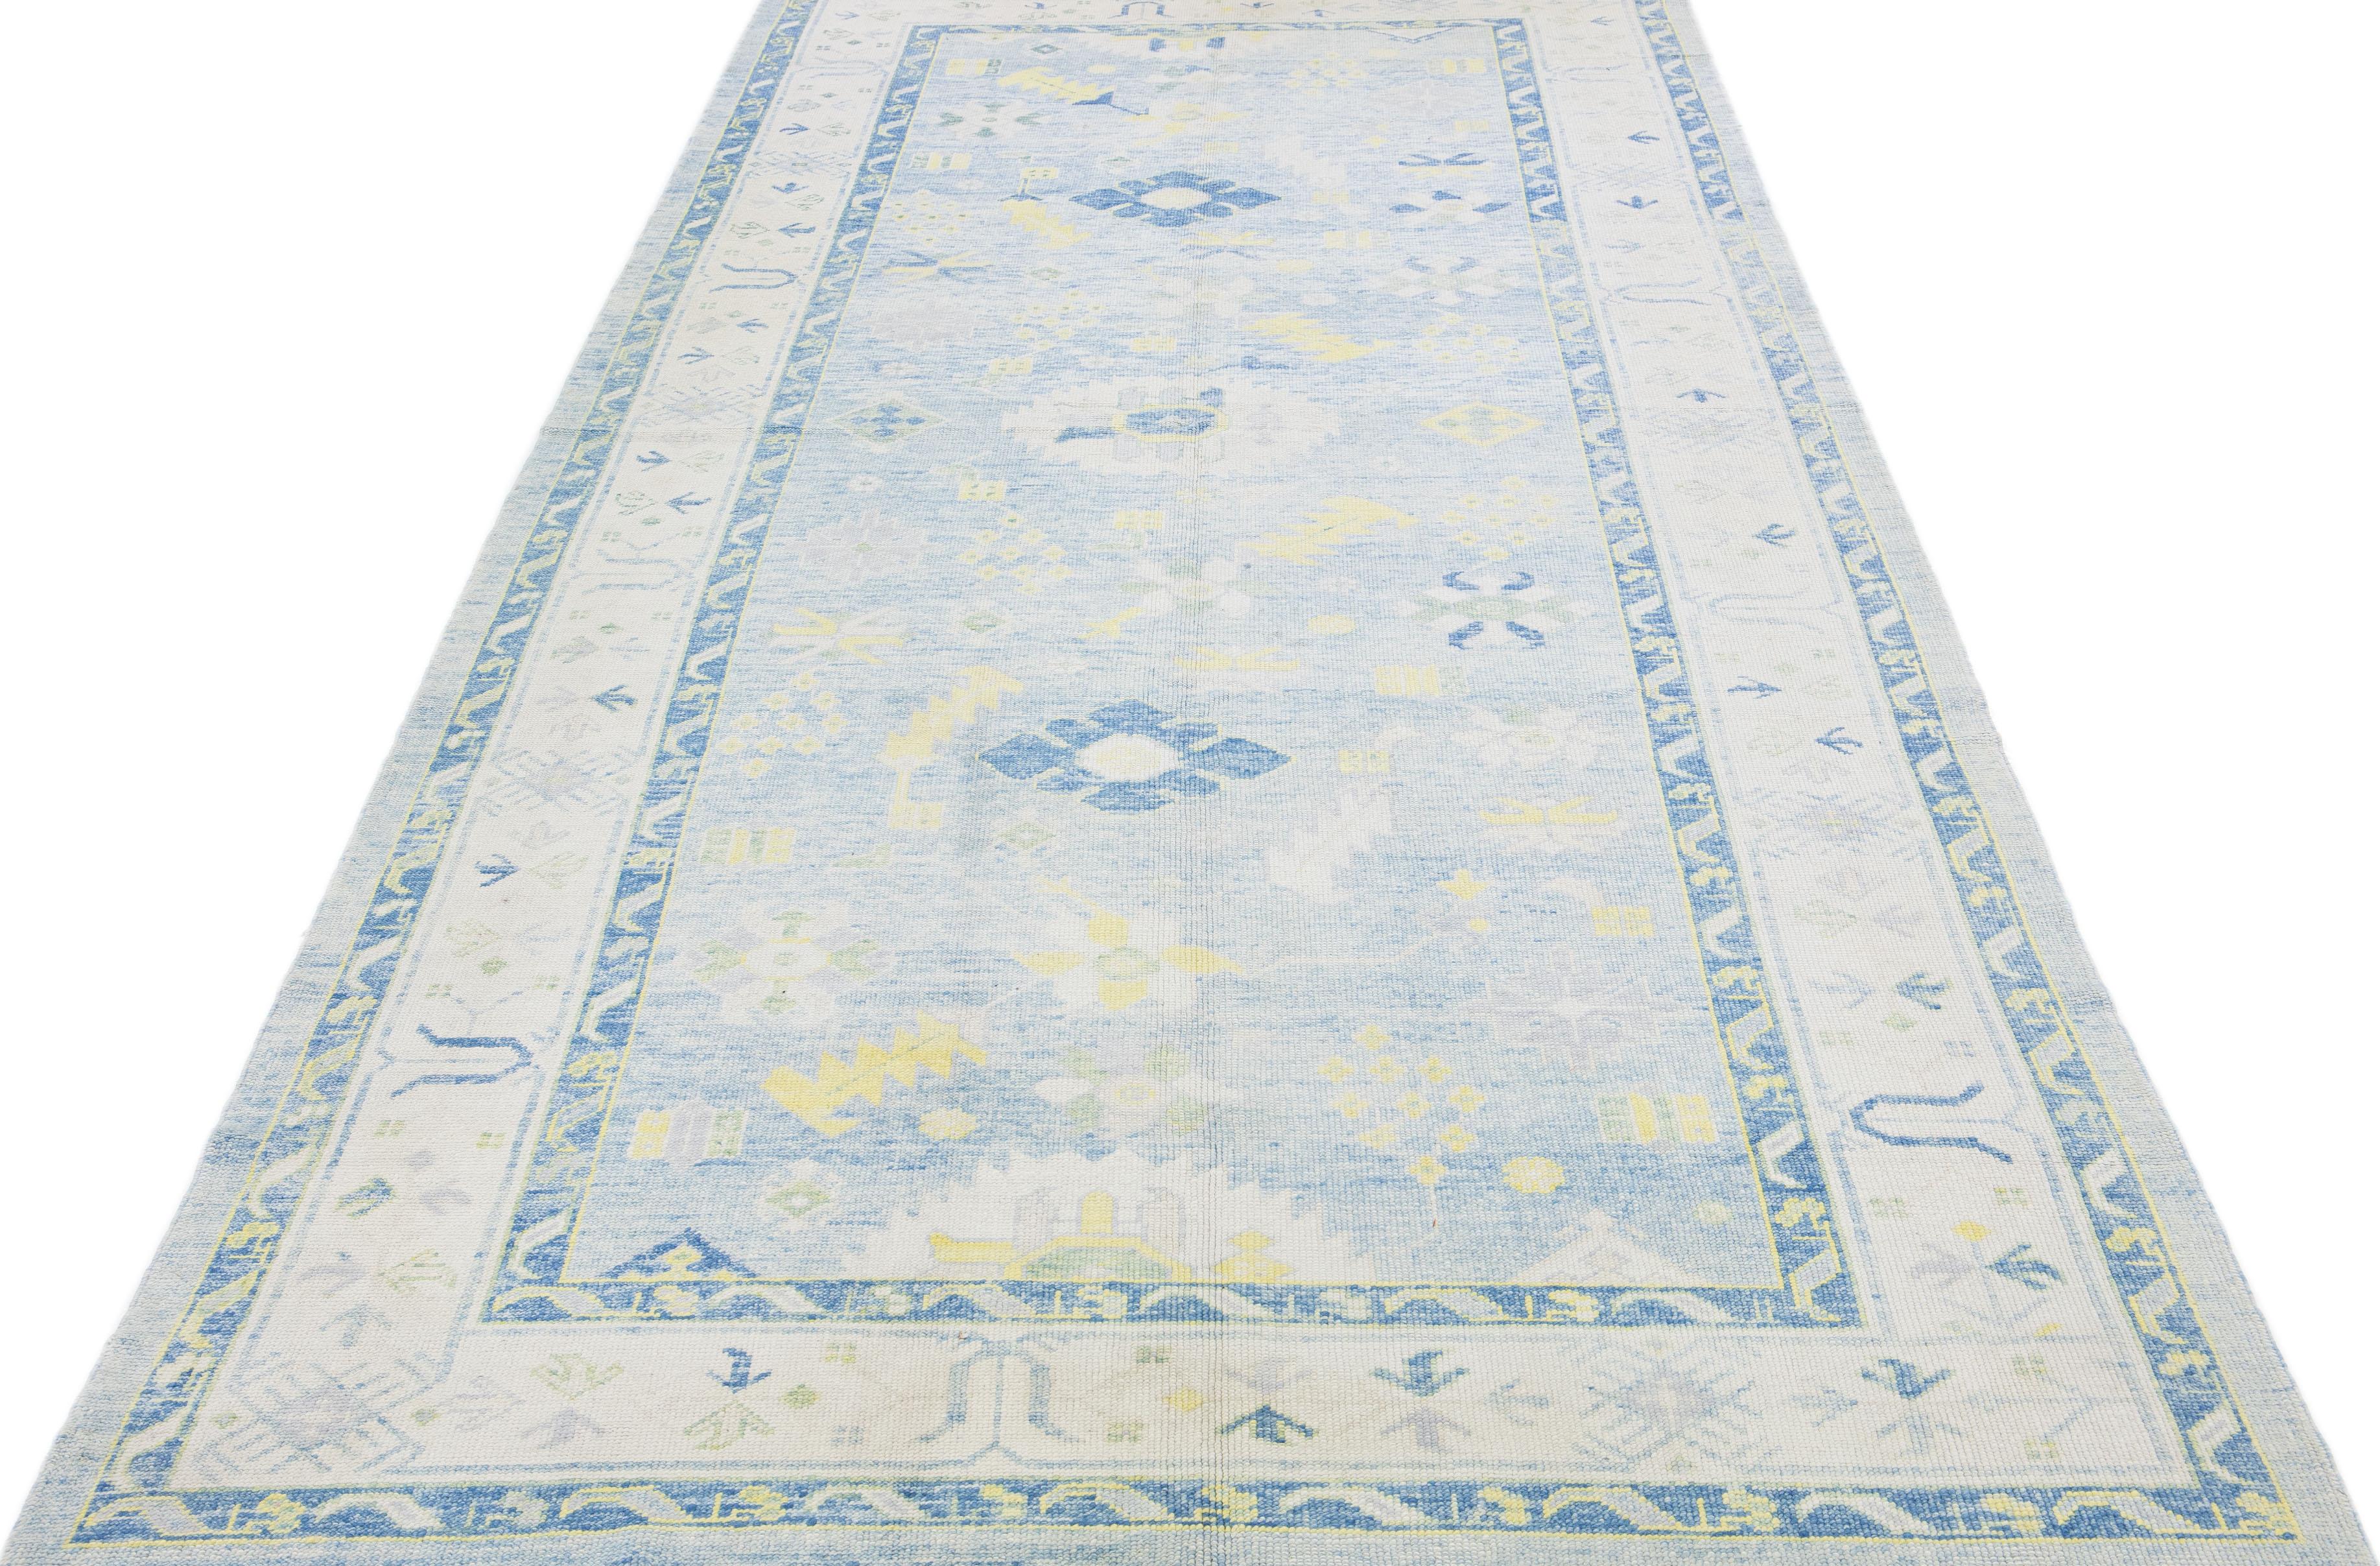 Beautiful modern Oushak hand-knotted wool rug with a light blue color field. This Turkish Piece has a gray frame with yellow and green accent colors in a gorgeous all-over floral design.

This rug measures: 6'11